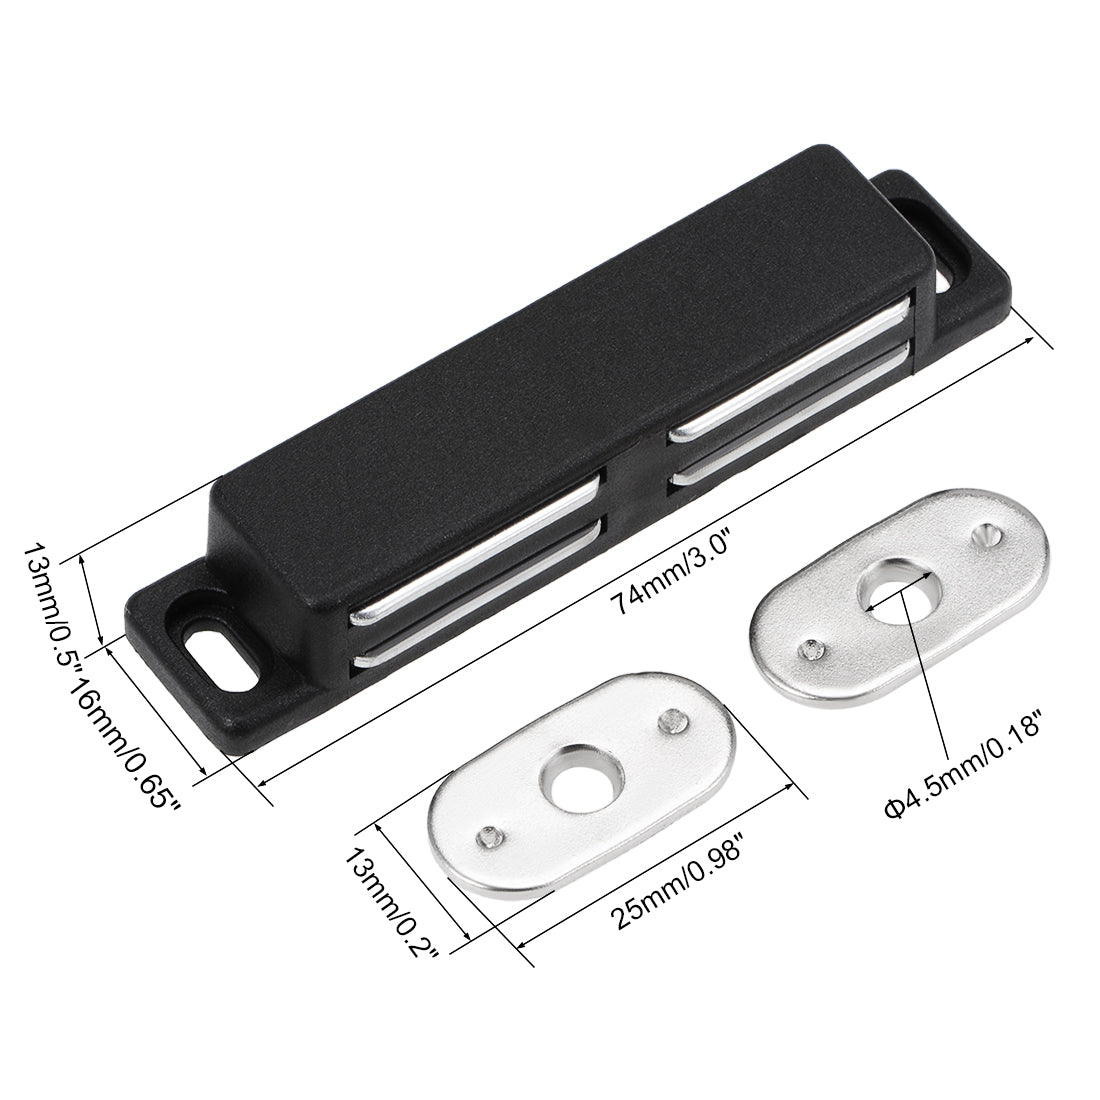 uxcell Uxcell Double Magnetic Latches Catch for Cabinet Door Cupboard 3" Long Black 4pcs